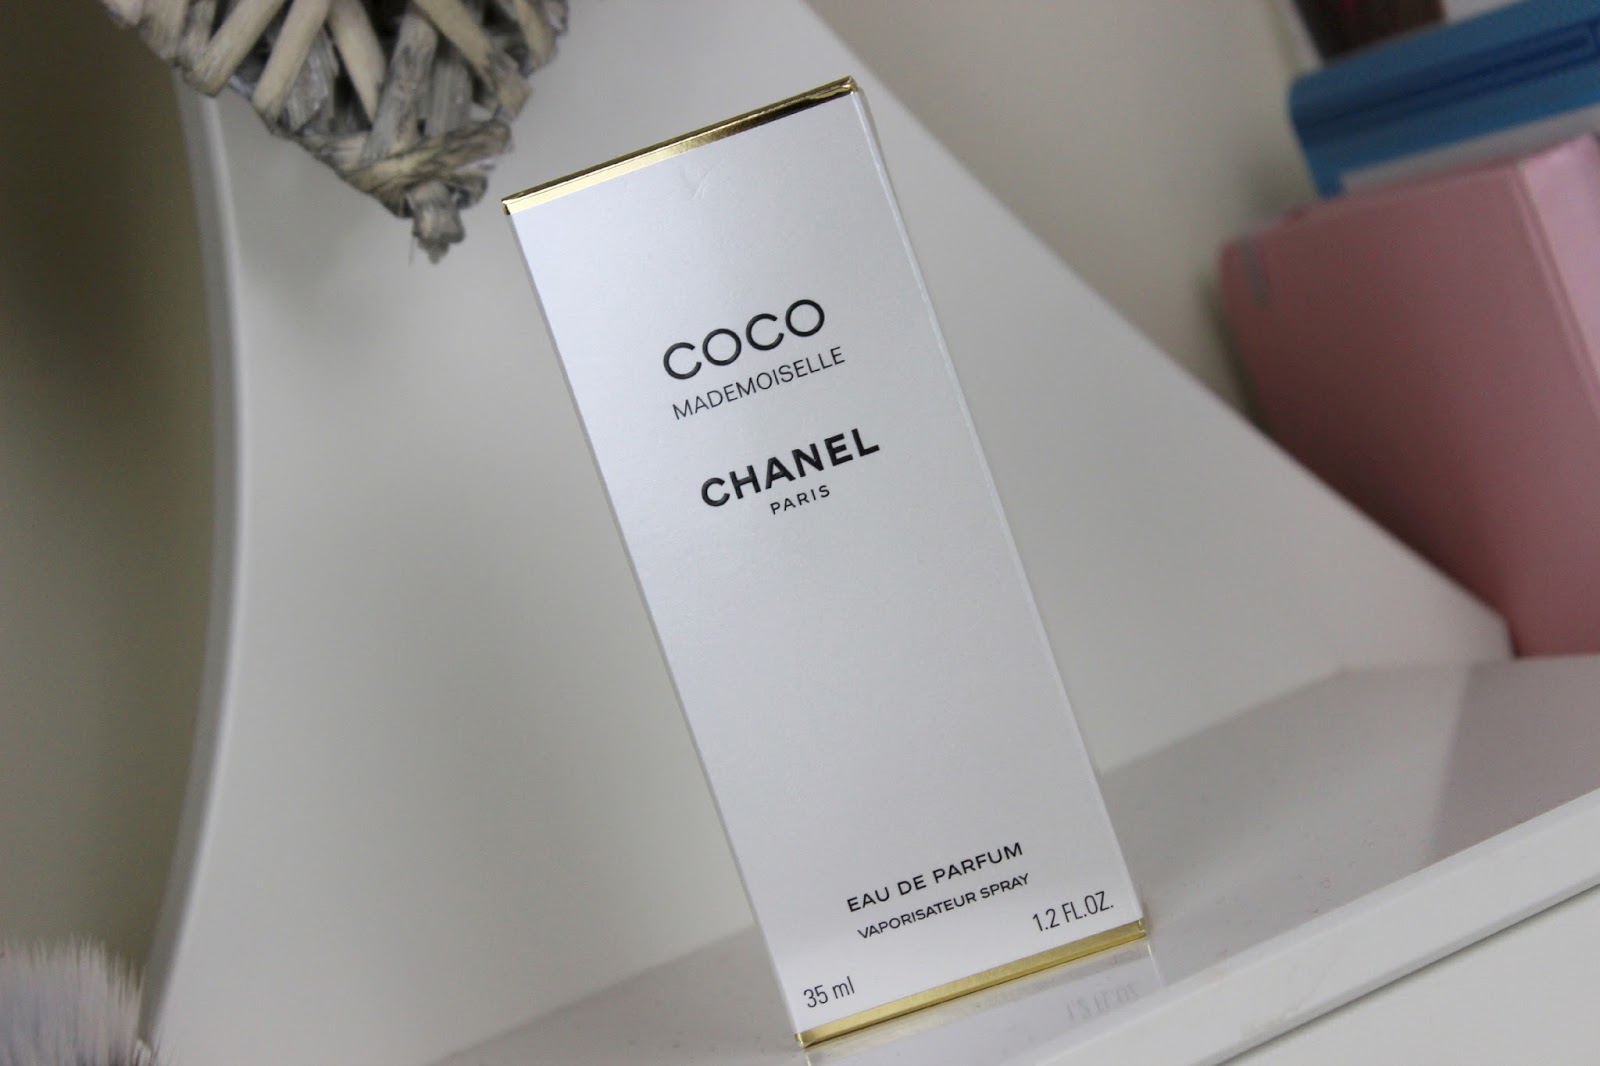 CHANEL COCO MADEMOISELLE EDP review - inner clouds 